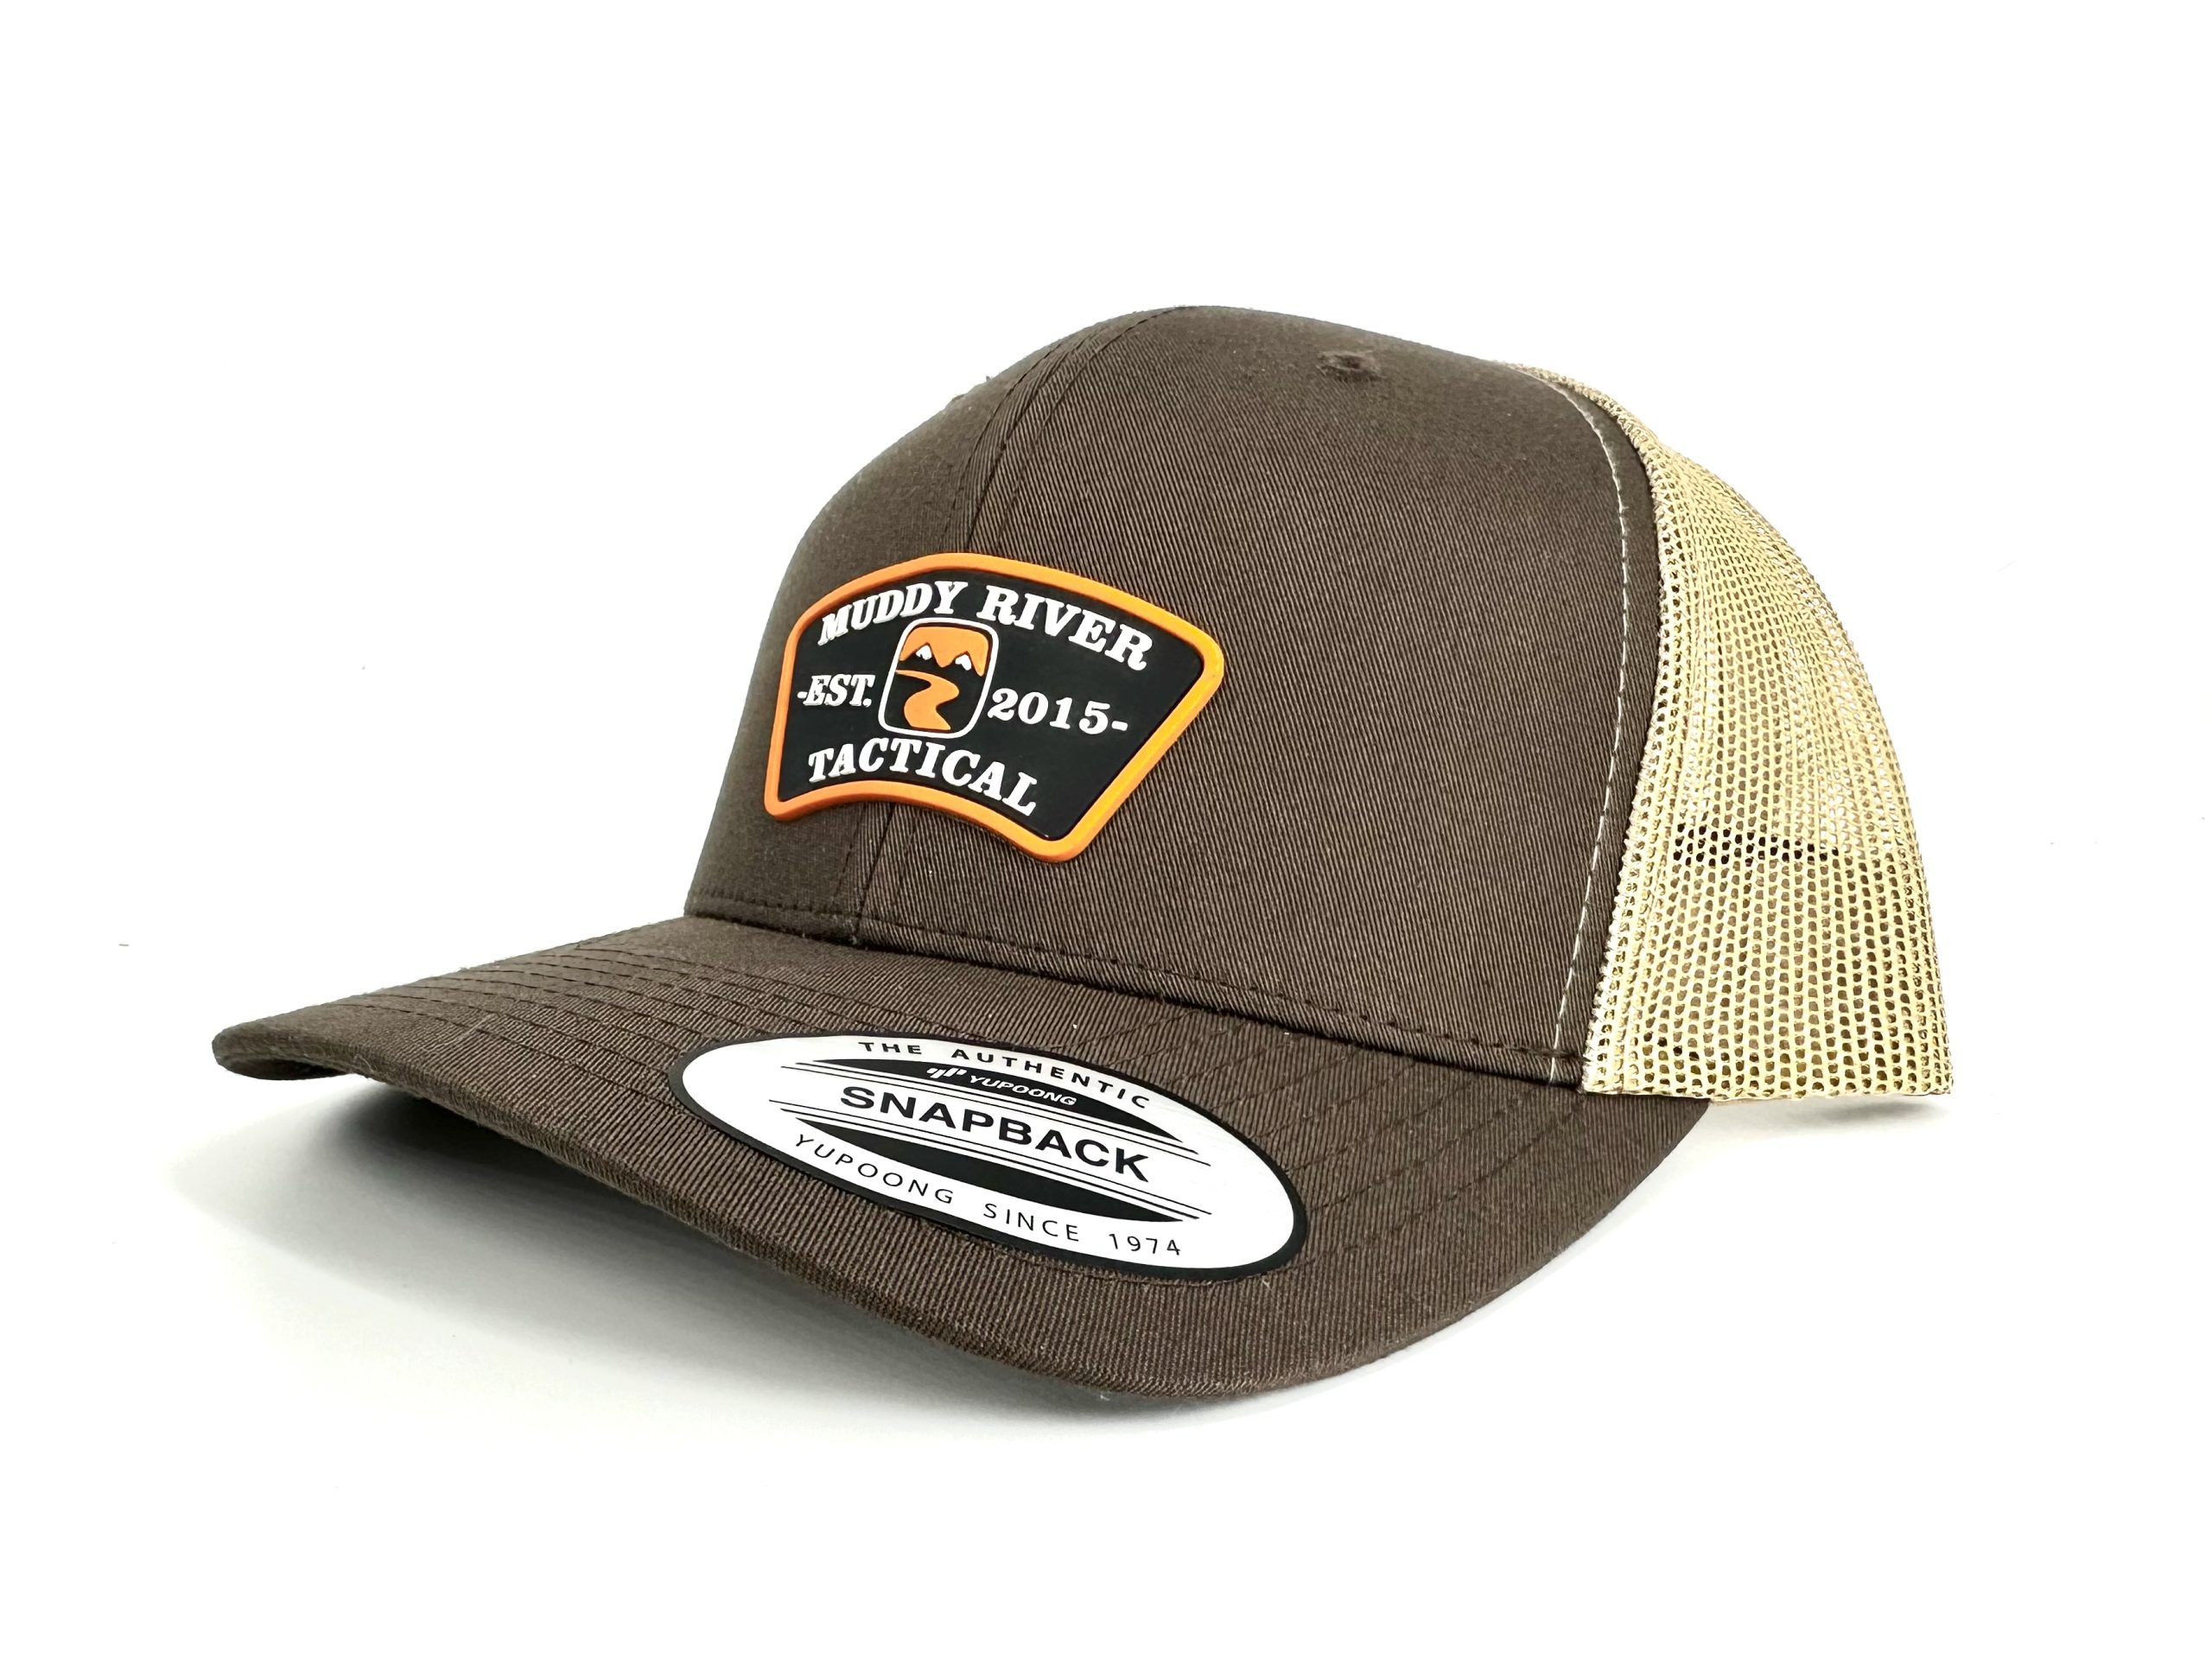 Muddy River Tactical EST. 2015 - Brown on Tan Snap Back Hat - Muddy ...